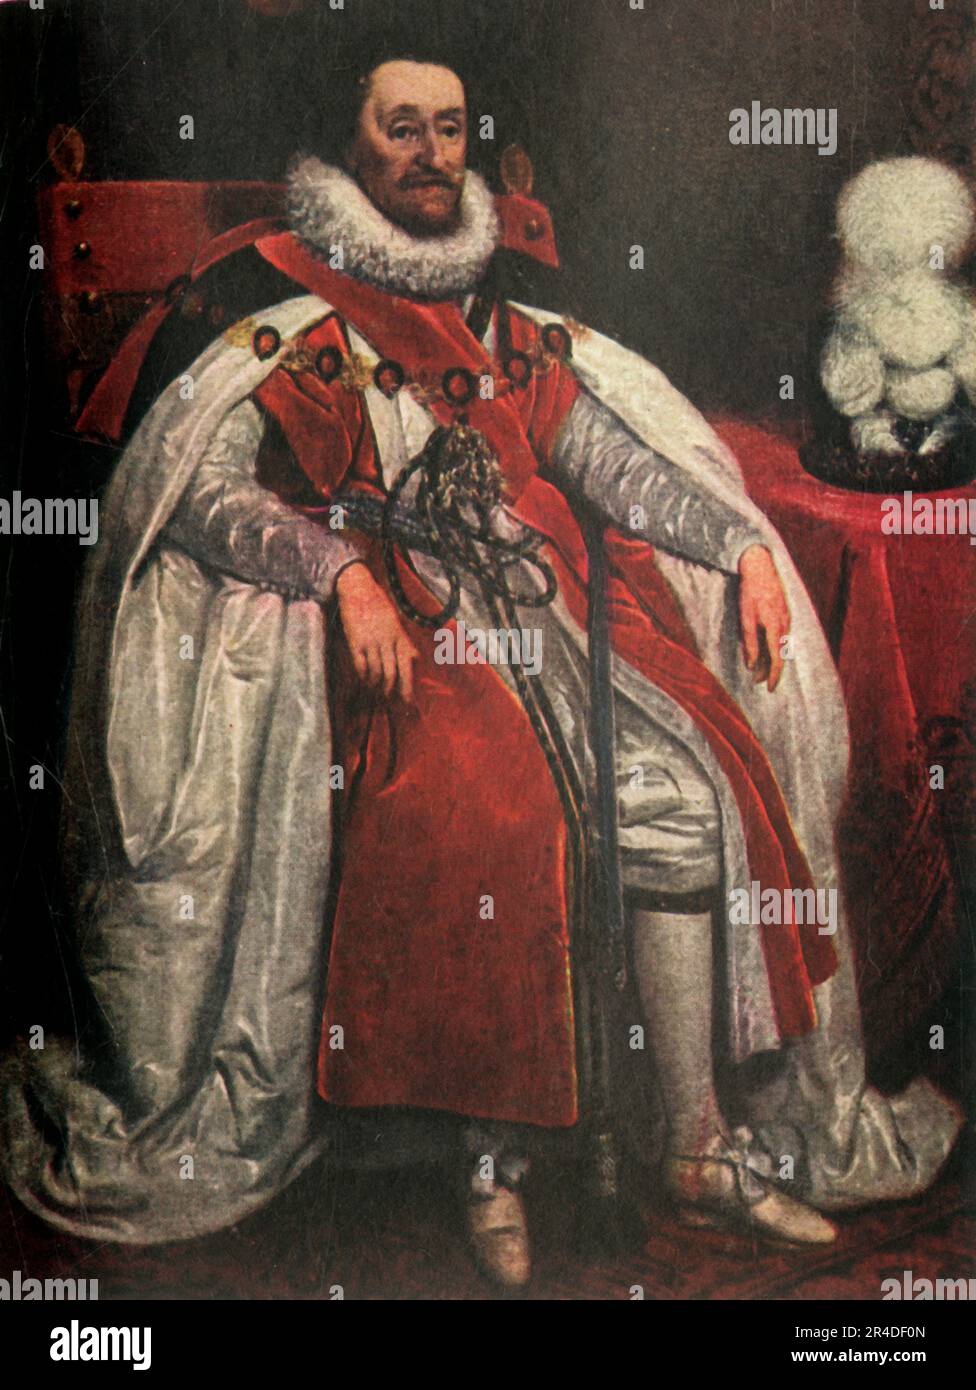 'James I', (c1911). King James I of England, James VI of Scotland. 'From a painting by Paul Van Somer. In the National Portrait Gallery'. Published in &quot;The Portrait Book of Our Kings and Queens 1066-1911&quot;, edited by T. Leman Hare. [T. C. &amp; E. C. Jack, London &amp; Edinburgh] Stock Photo